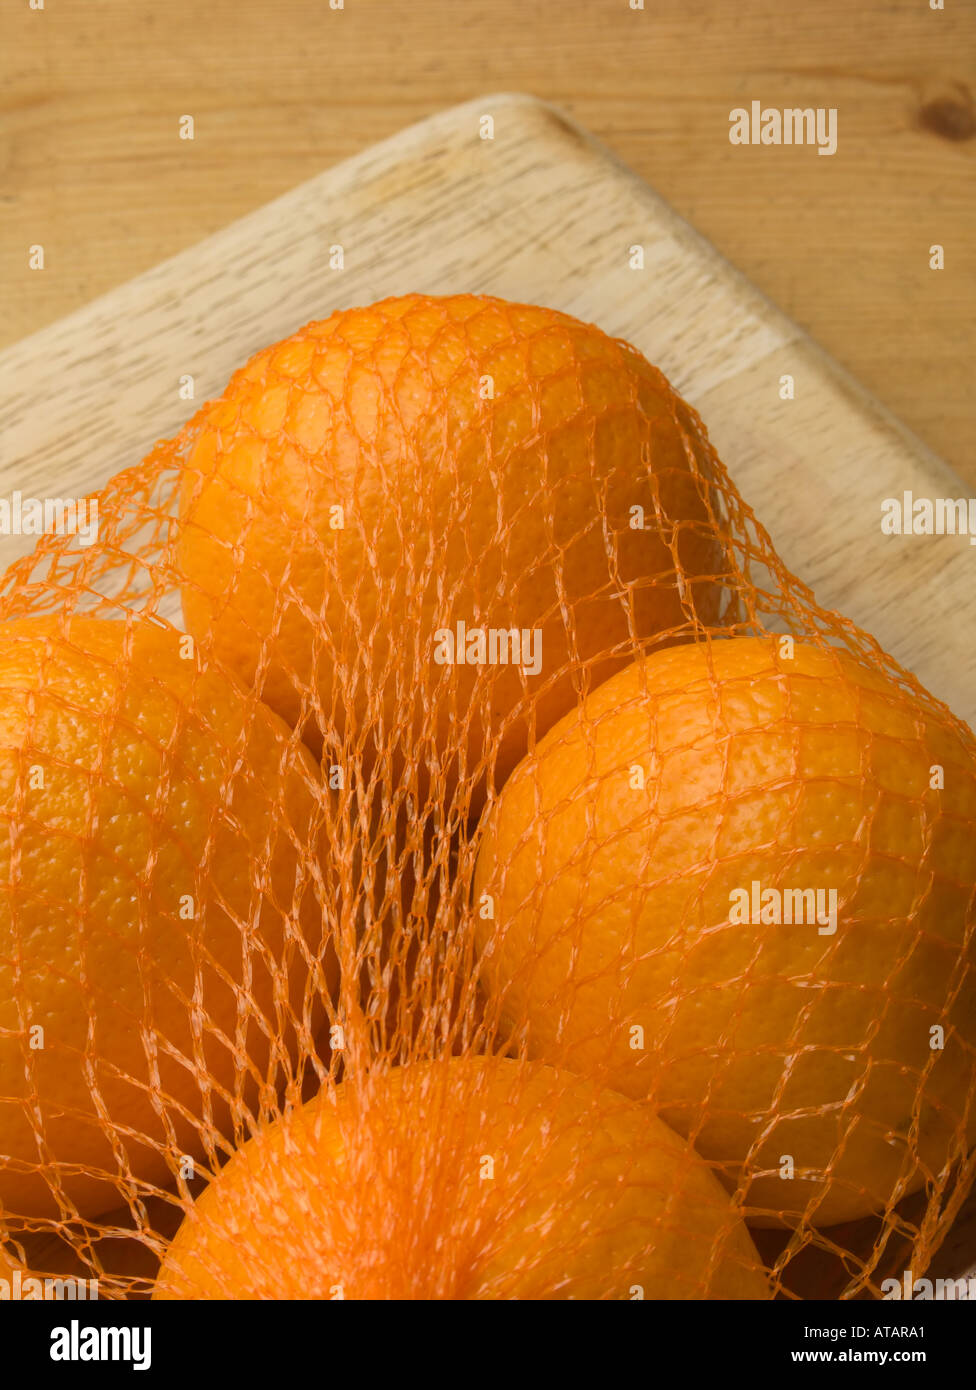 Oranges in net bag on chopping board Stock Photo